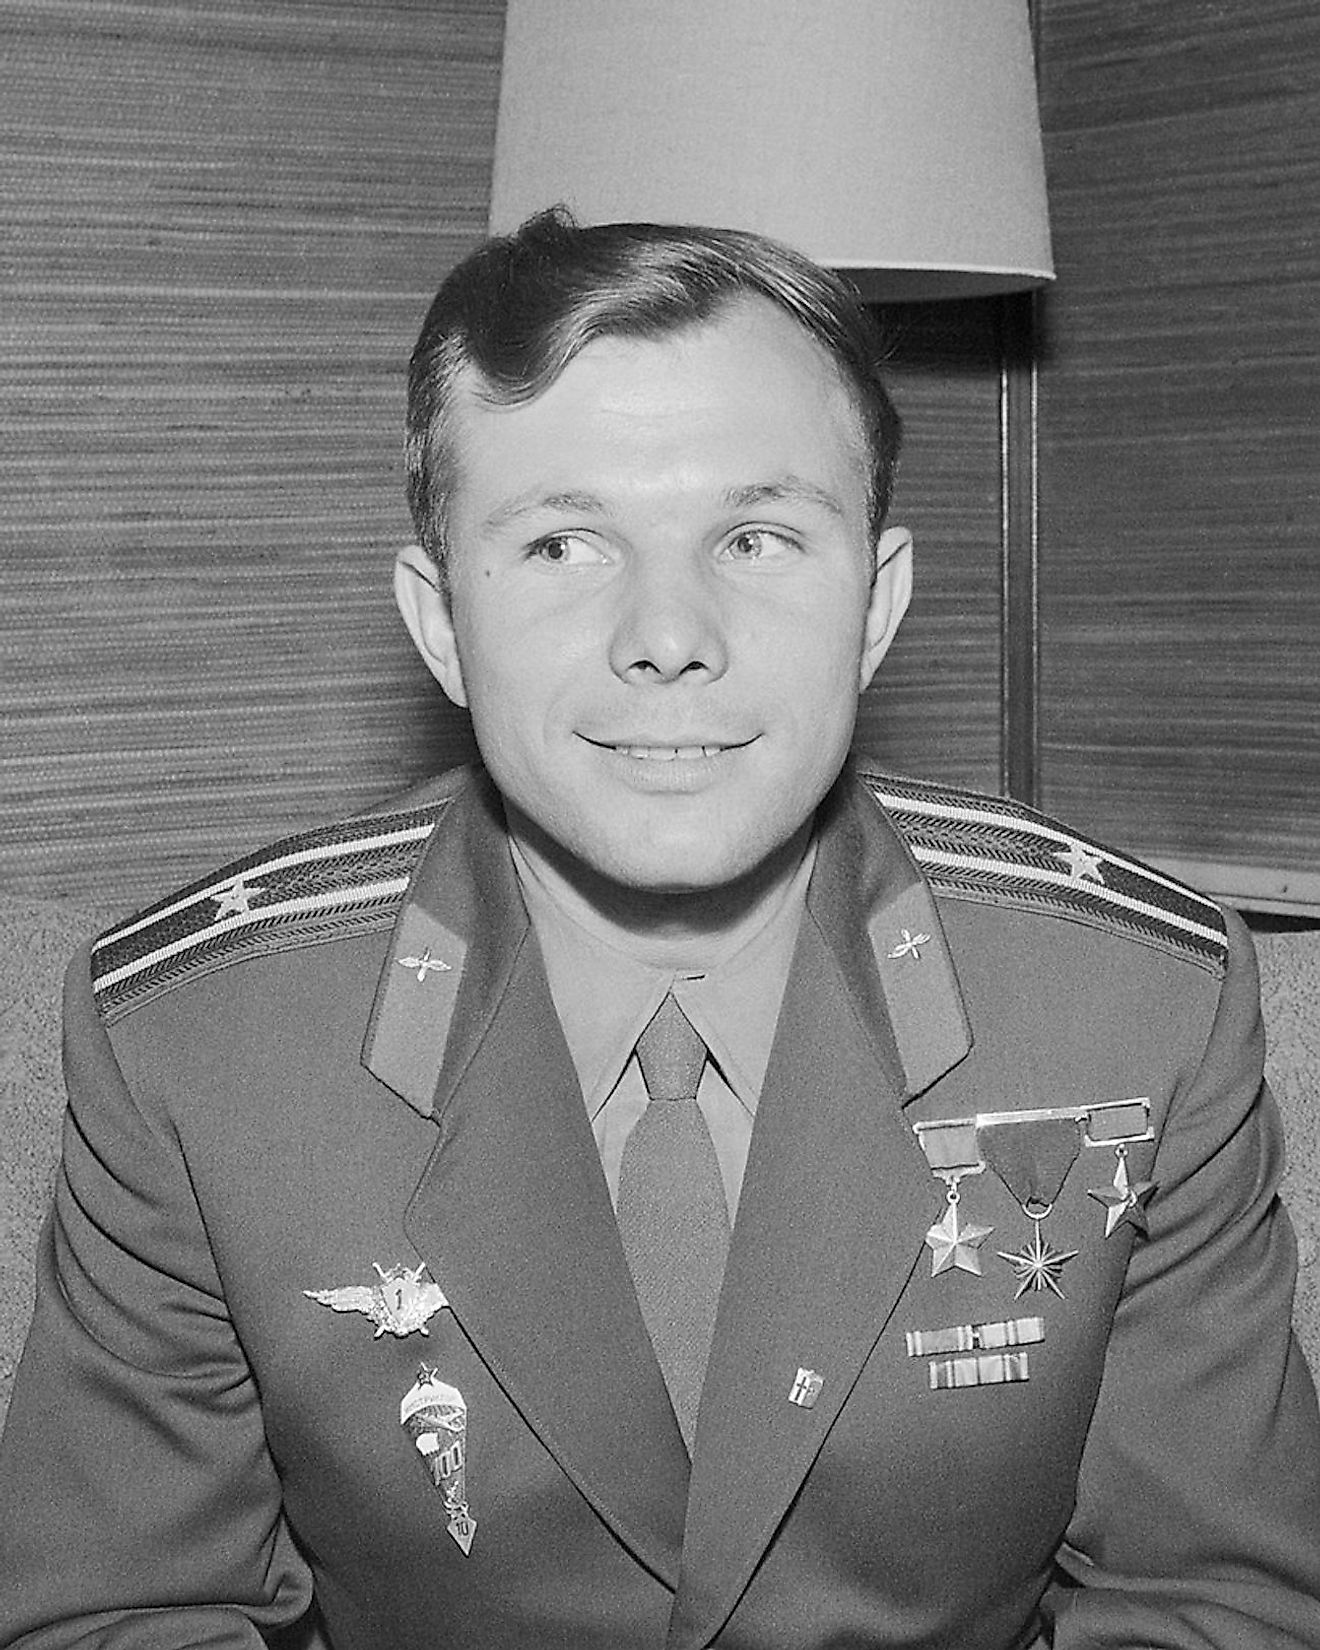 Photograph of the Soviet cosmonaut Yuri Gagarin at a press conference during his visit to Finland.